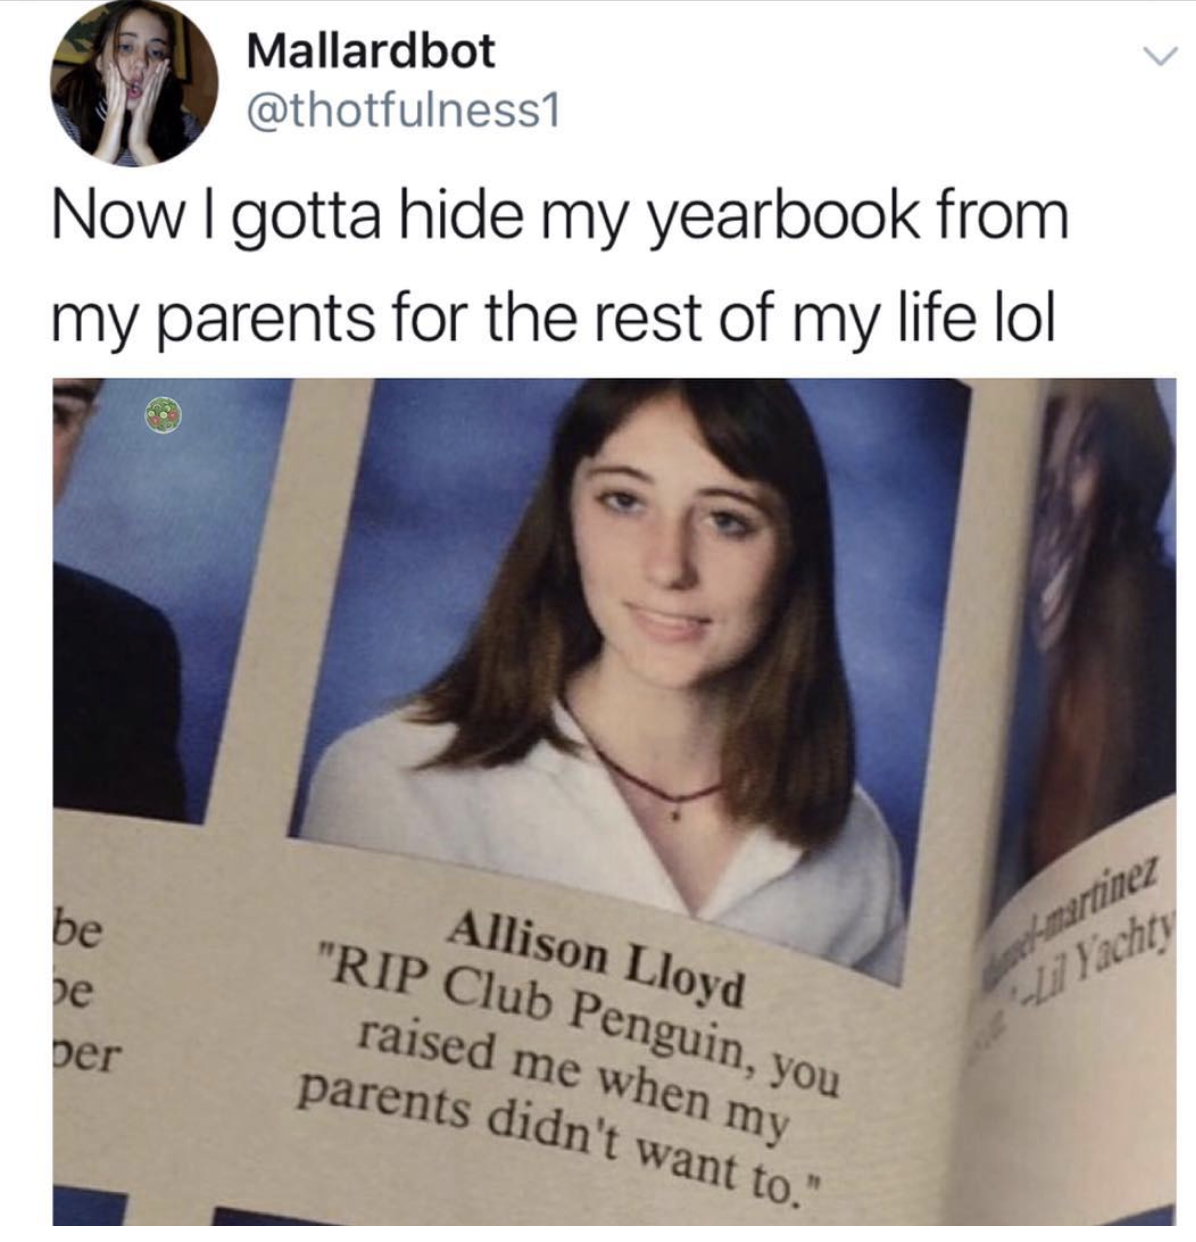 memes - yearbook meme - Mallardbot Now I gotta hide my yearbook from my parents for the rest of my life lol Der Allison Lloyd "Rip Club Penguin, you raised me when my parents didn't want to."